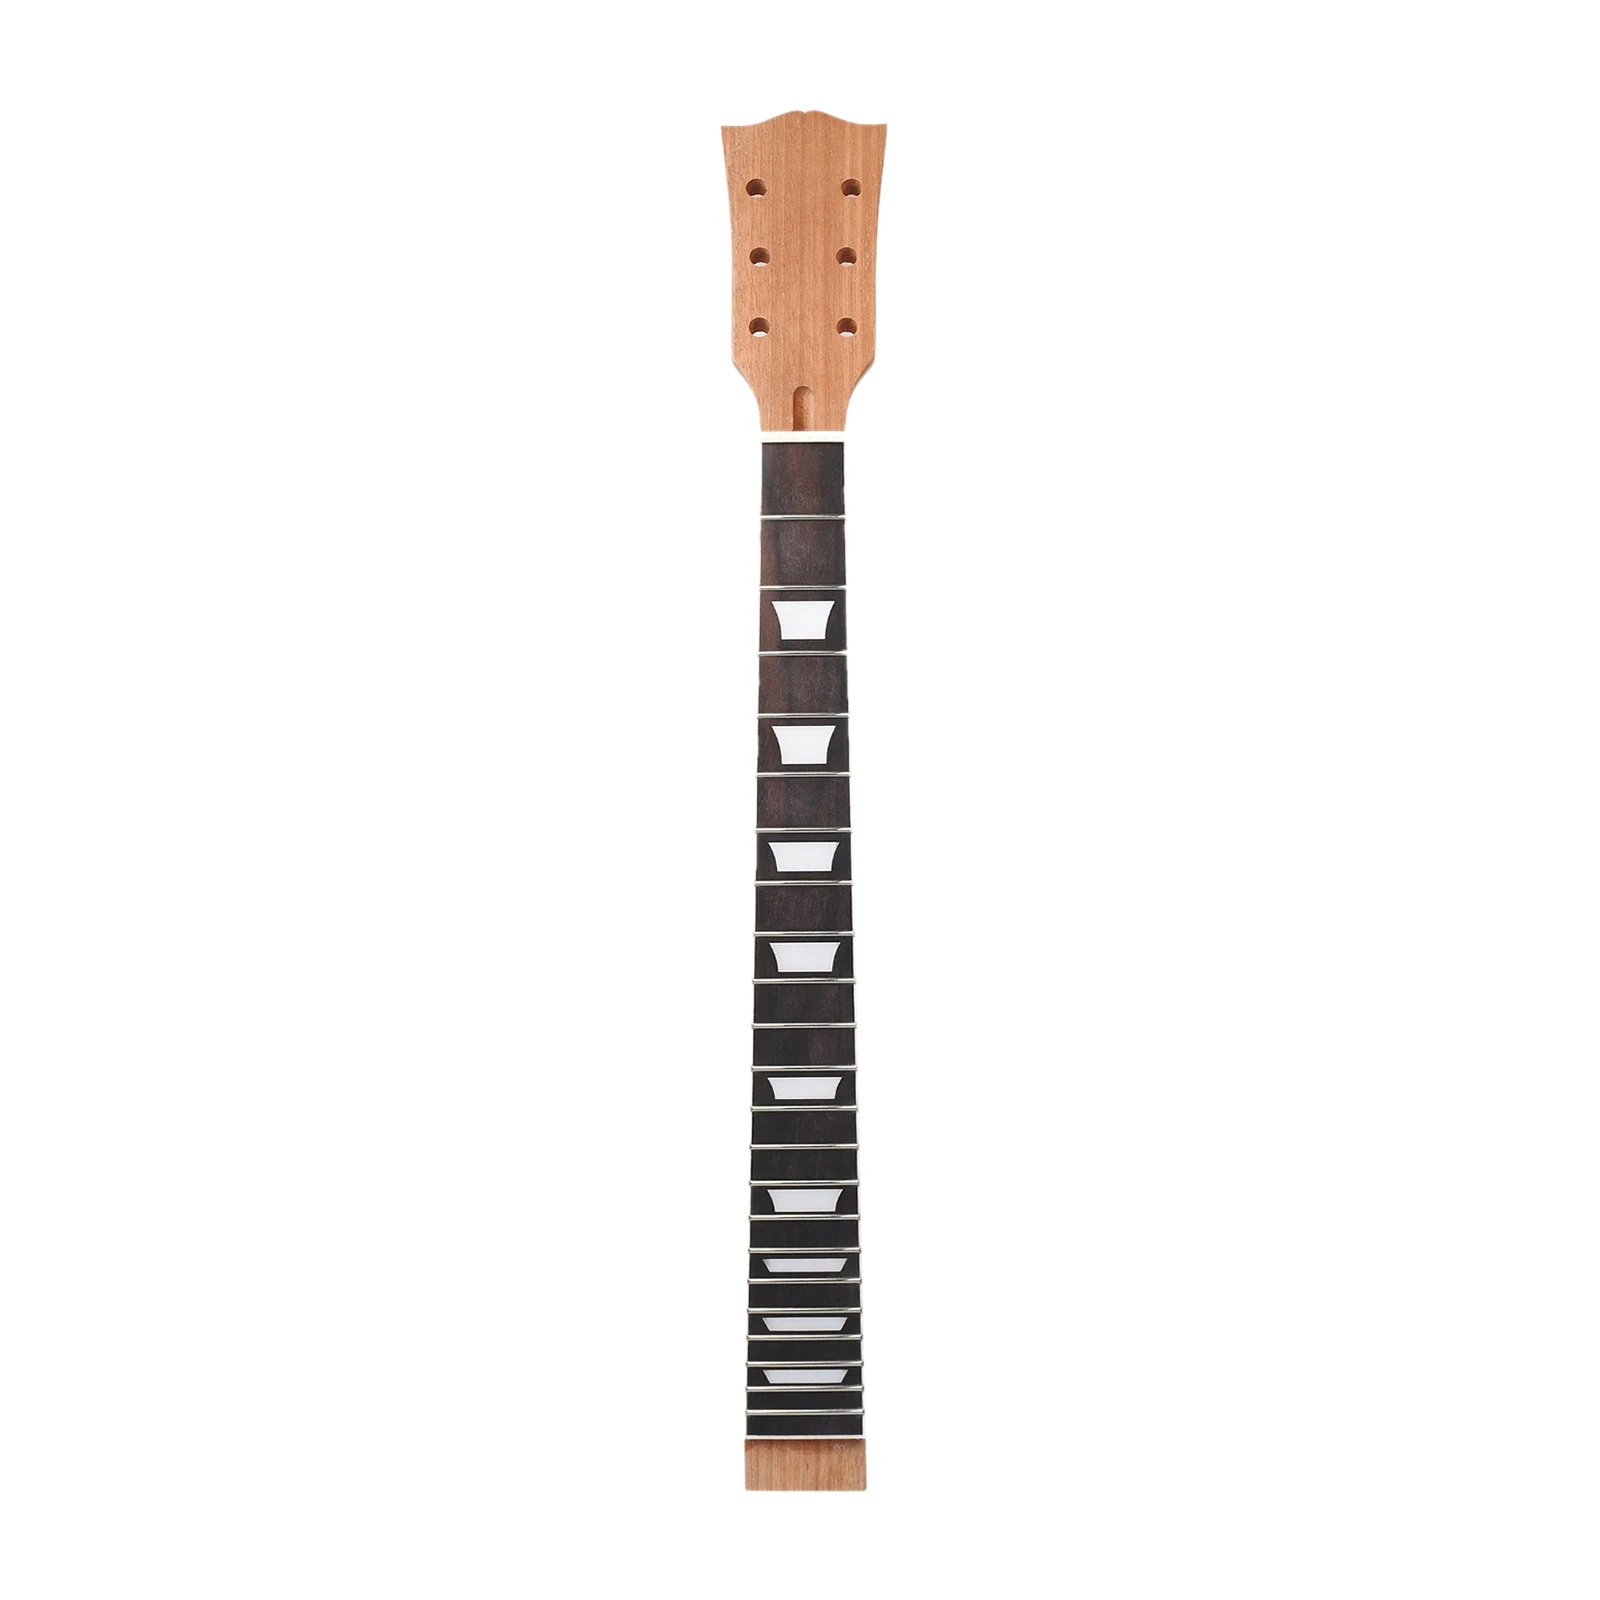 Electric Guitar Neck Maple Rosewood Solid Black Finish for  Replacement 22 Fret (Black with trapezoid inlays)